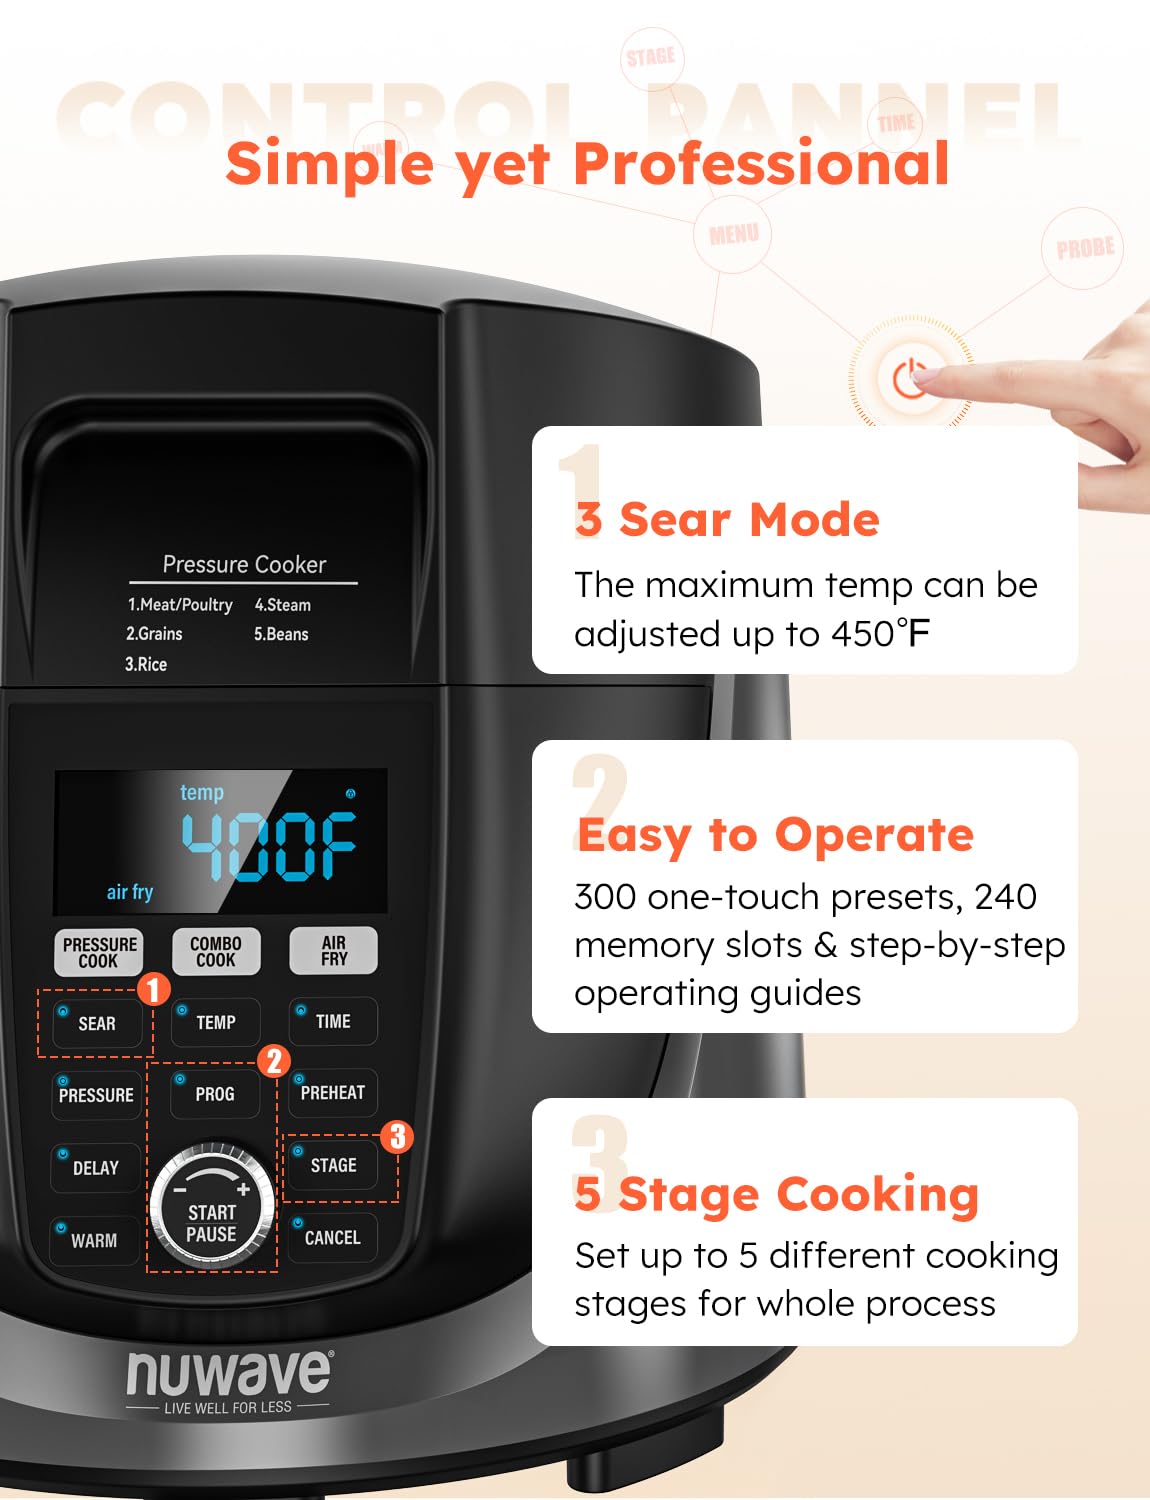 NuWave Duet Air Fryer, Electric Pressure Cooker & Grill Combo, 540 IN 1 Multicooker with 3 Removable Lids that Slow Cook, Sears, Sautés, 18/10 SS Pot, Sure-Lock Safety Tech & 10 Deluxe Accessories